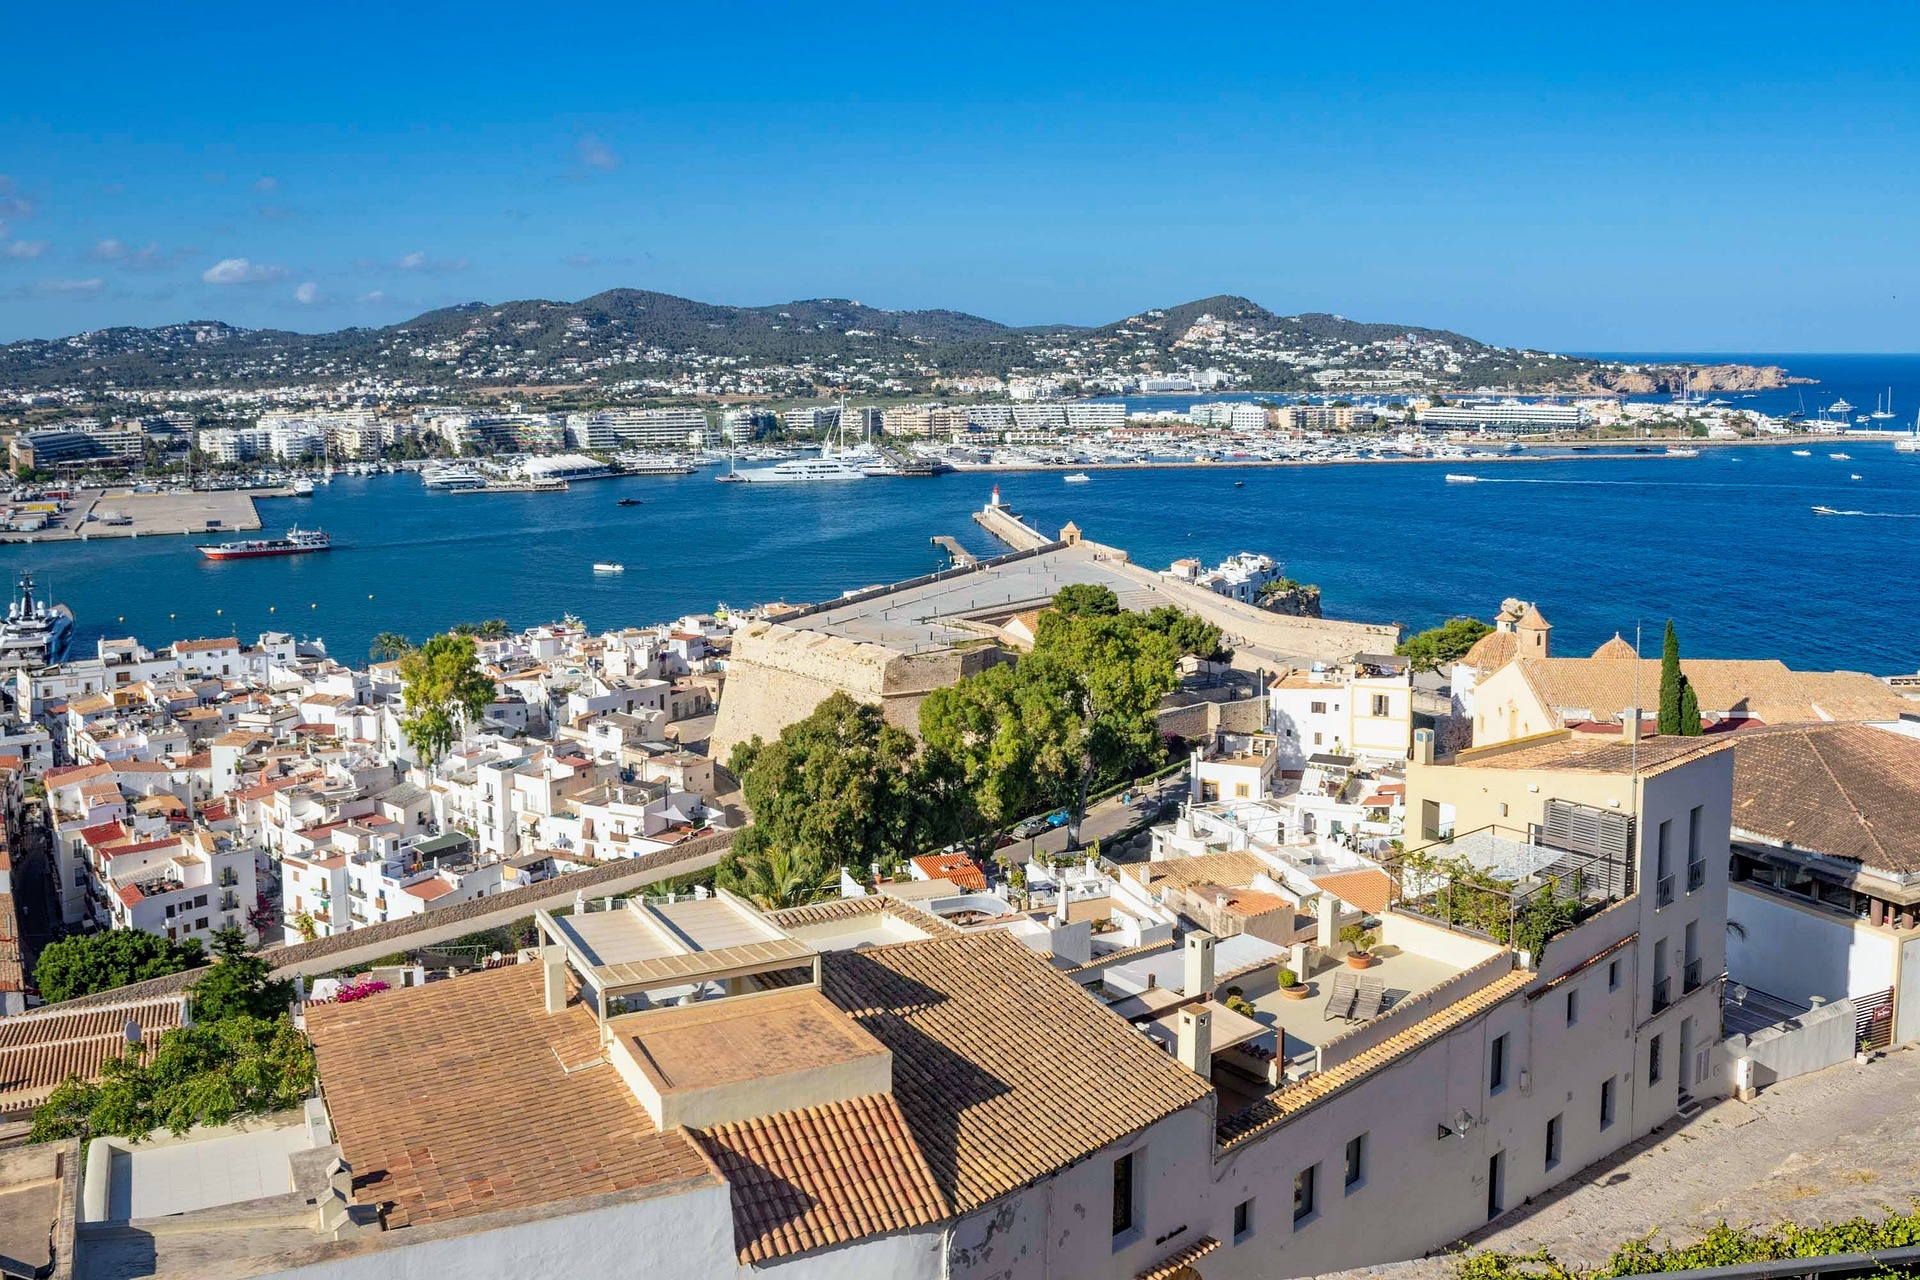 Free tour of Ibiza and activities